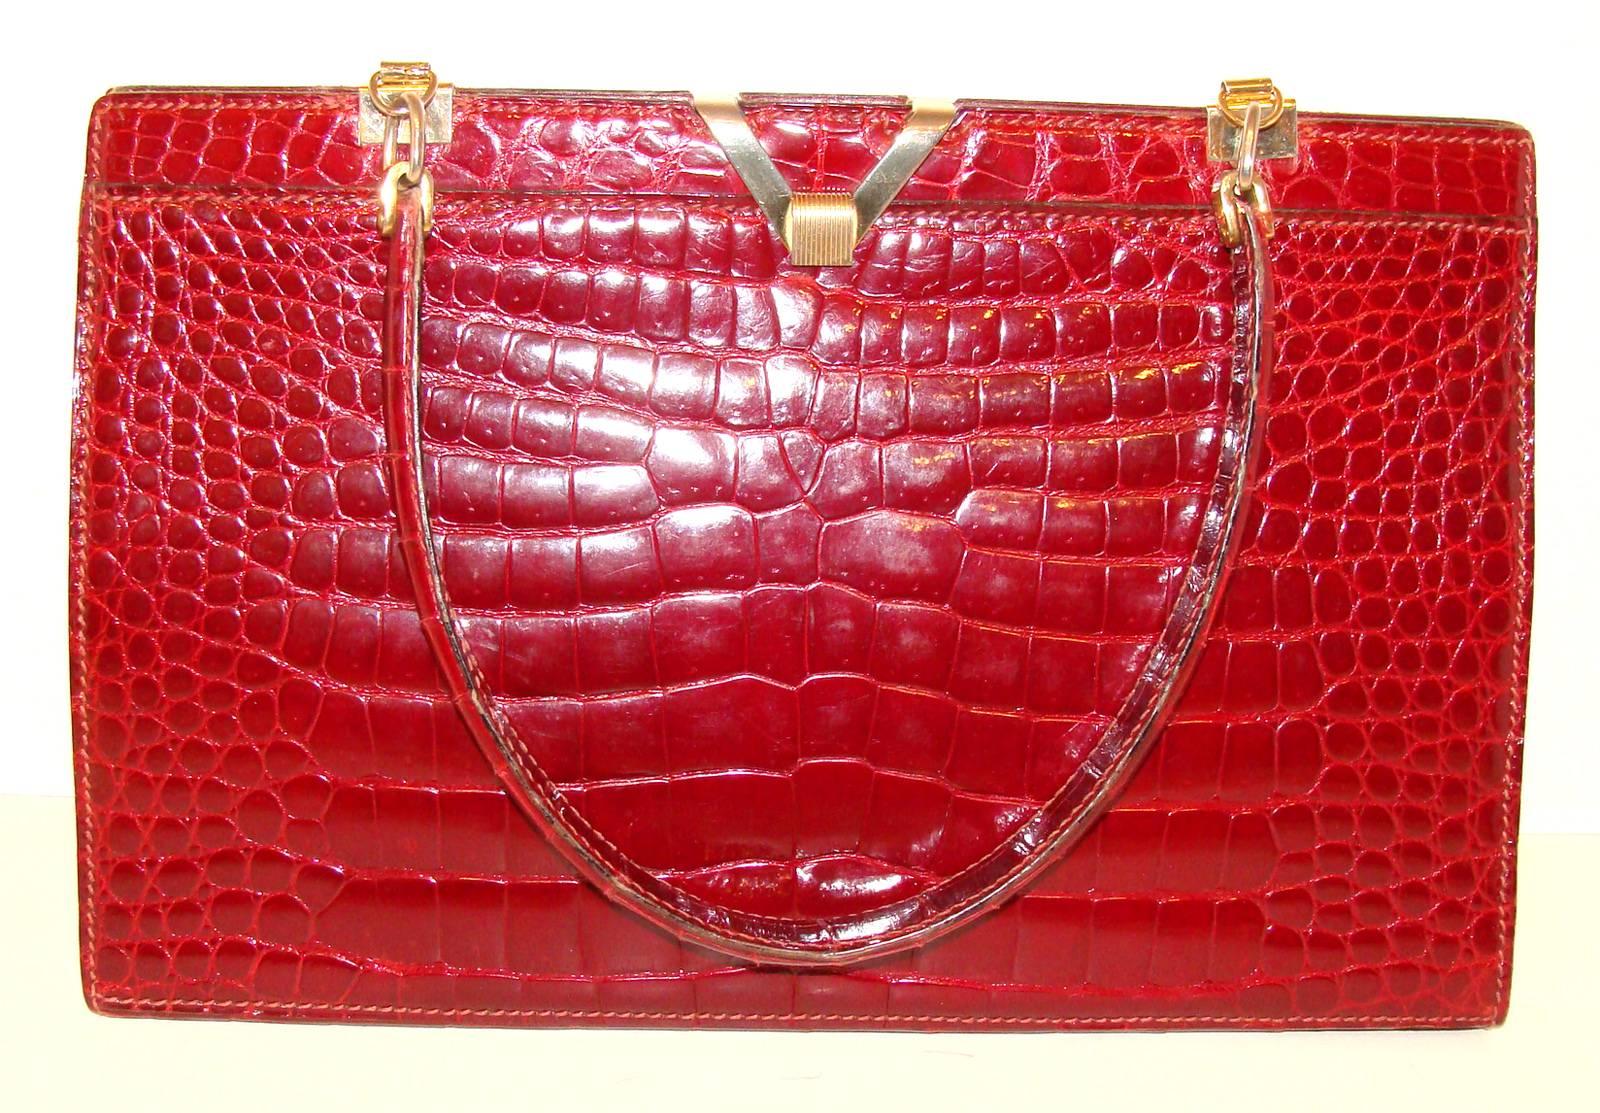 This roomy alligator bag is from the 1950's.  The color is a deep red, similar to wine, but not as deep as a burgundy.  The front and back are both center skins and have rigid matching stitching.    There is a stylized G logo in gold which indicates